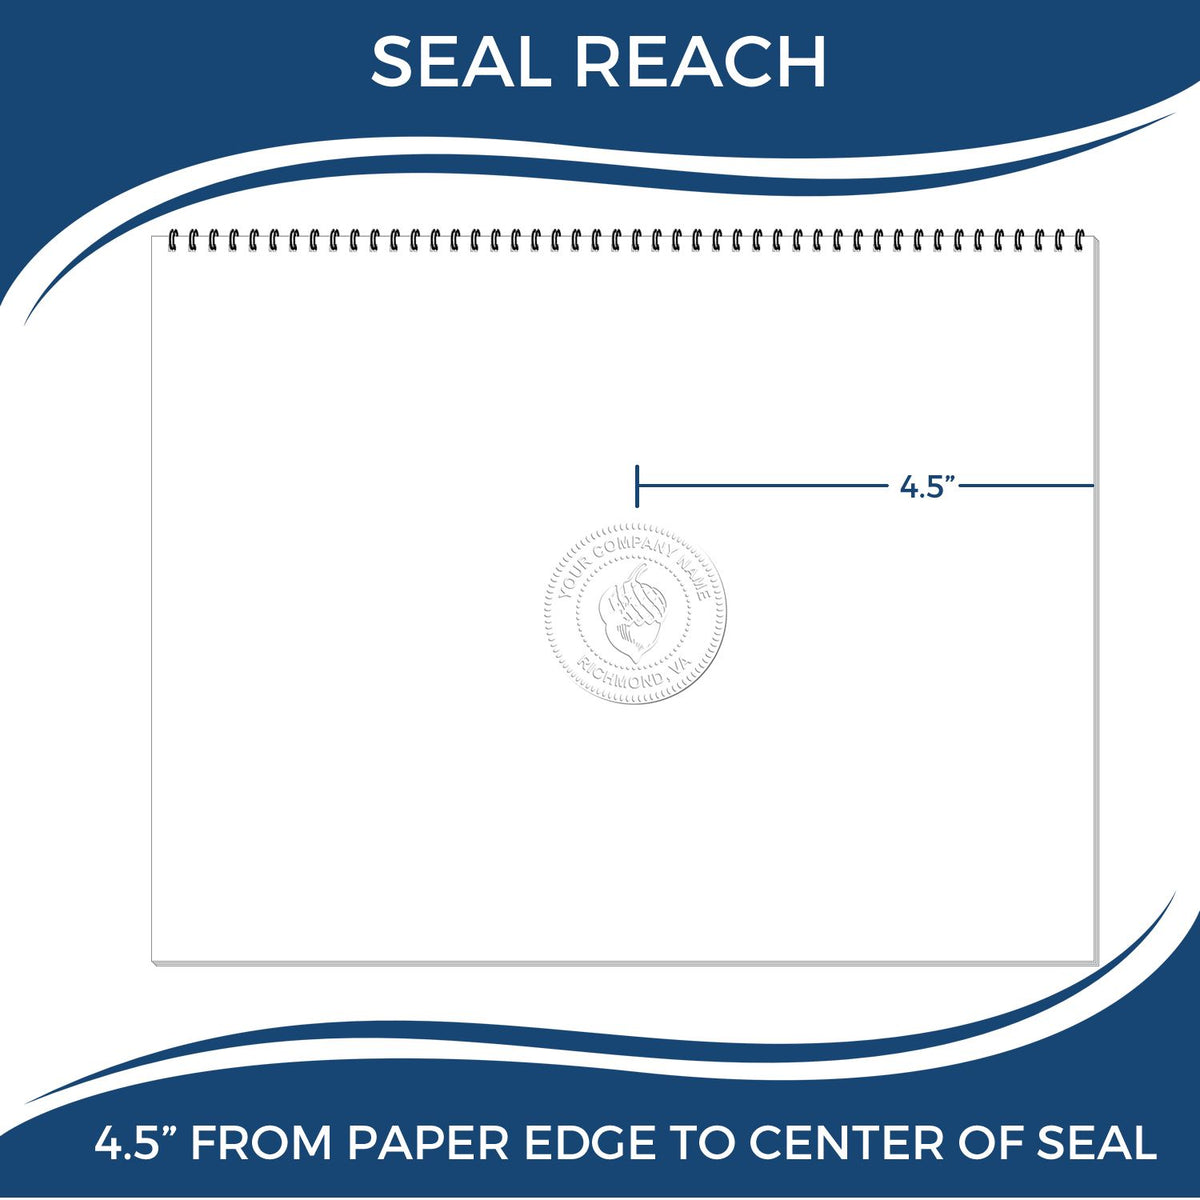 An infographic showing the seal reach which is represented by a ruler and a miniature seal image of the Extended Long Reach Mississippi Surveyor Embosser